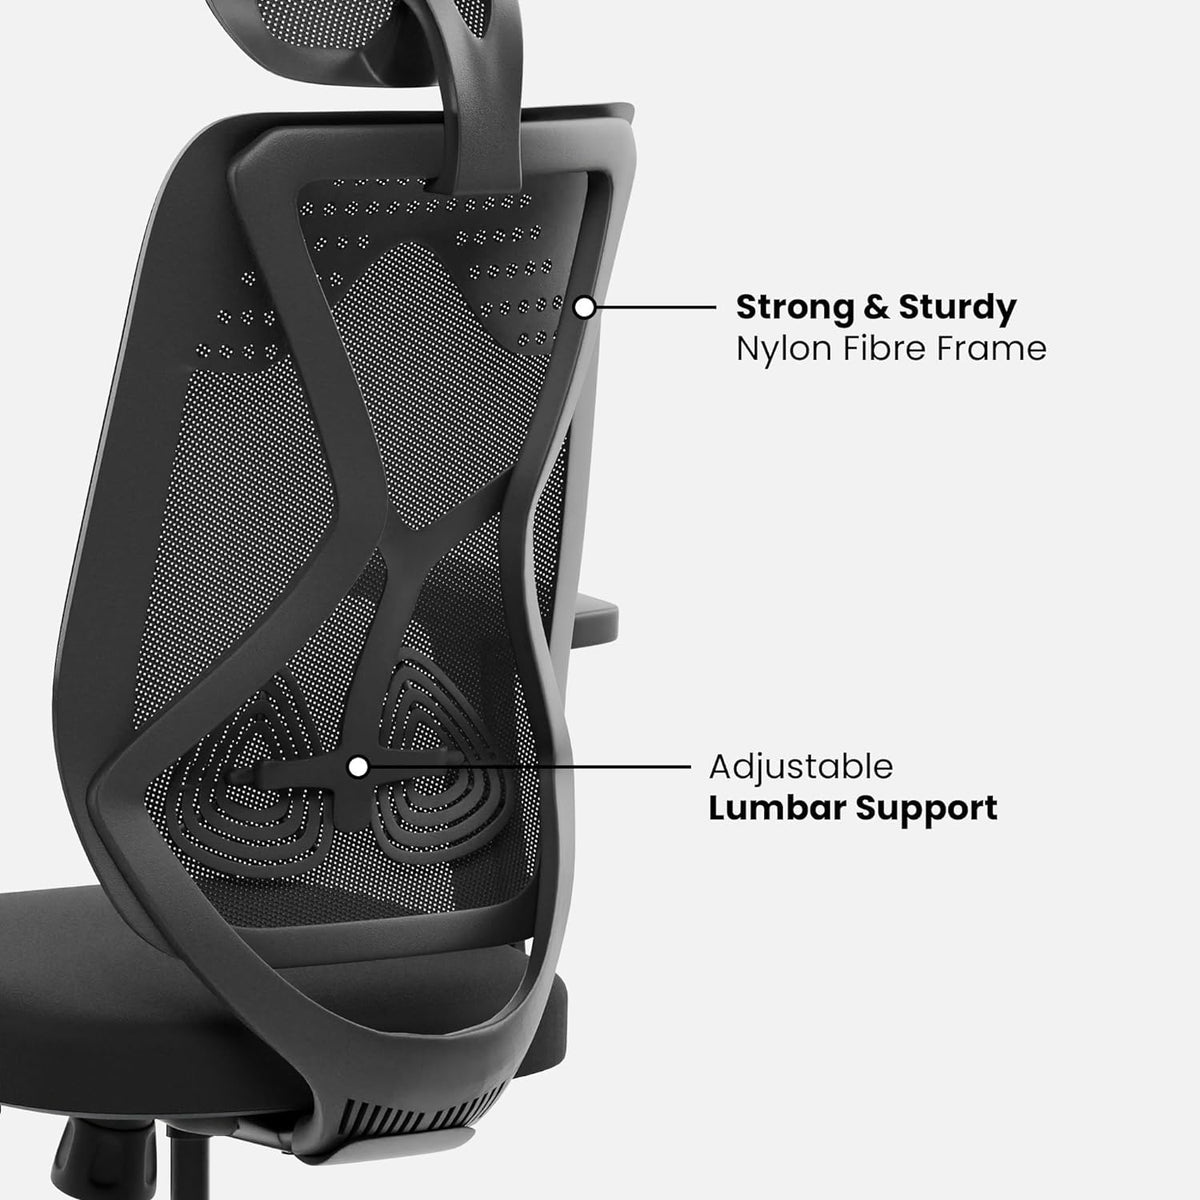 SmileSellers Hector Multi-Purpose Gaming Chair, High Back Mesh Ergonomic Office Chair, Desk Chair with 2D Adjustable Armrests, Smart Synchro Multi-Tilt Lock Mechanism | No Seat Slider